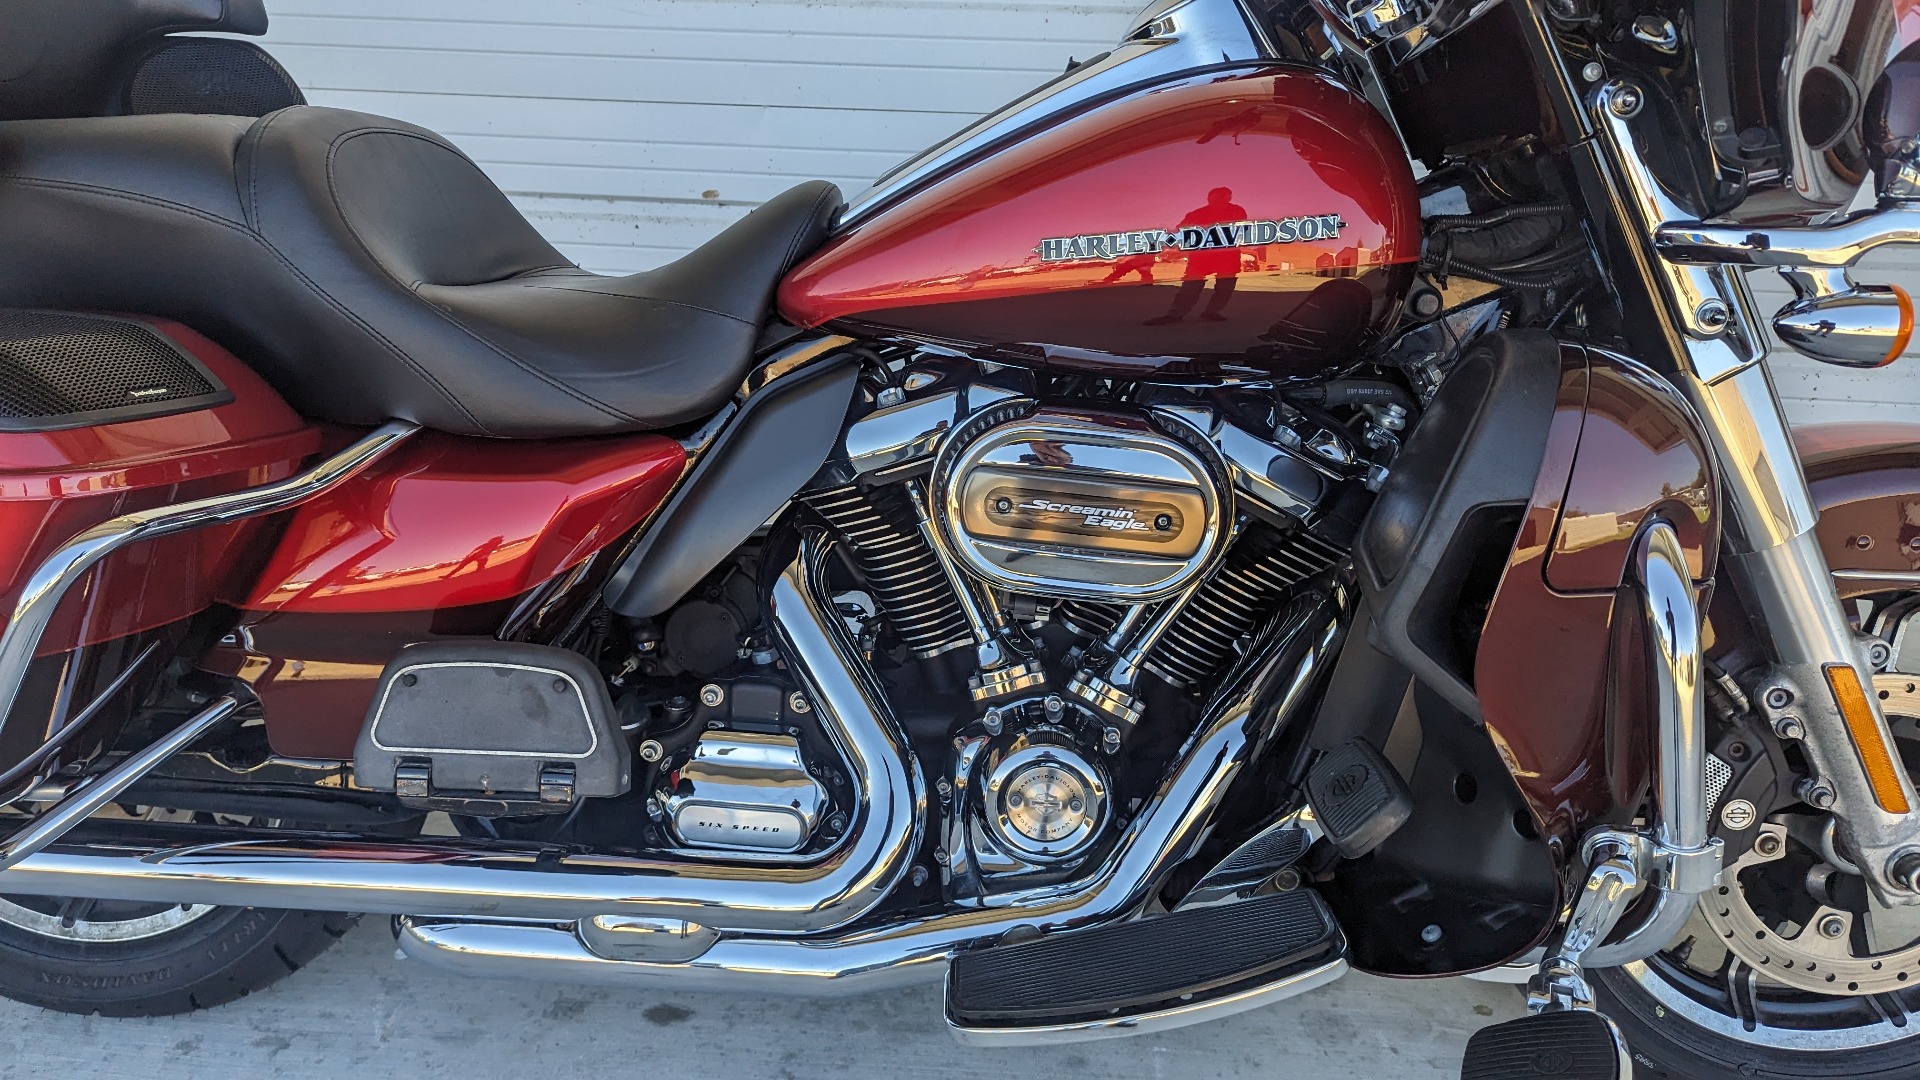 2018 harley davidson ultra limited for sale in texas - Photo 4